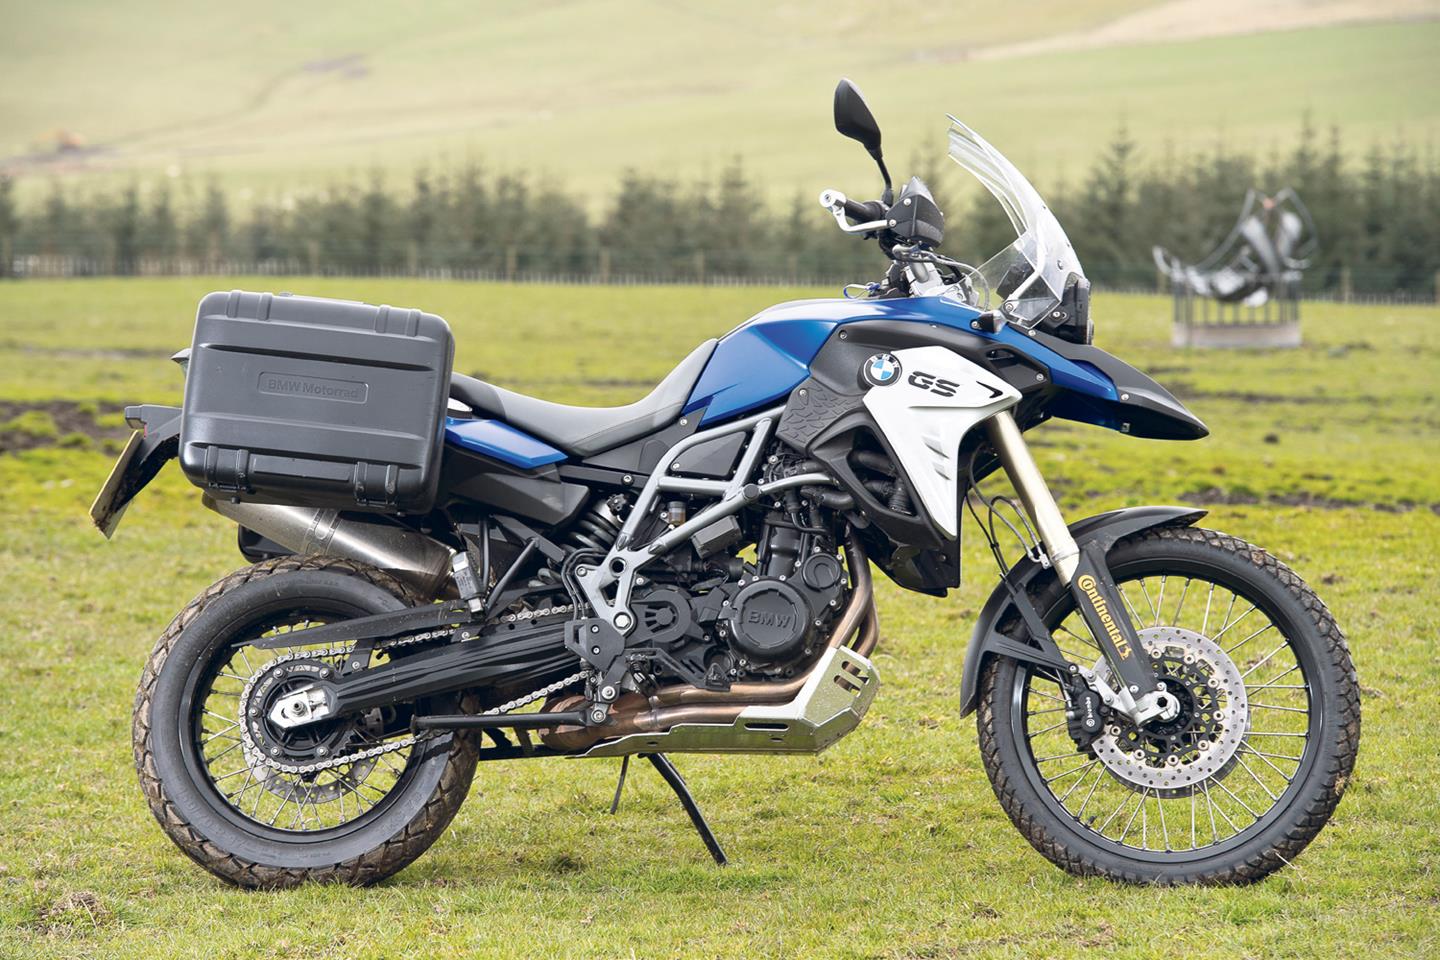 BMW F 800 GS (2008-2018) Review | Owner & Expert Ratings